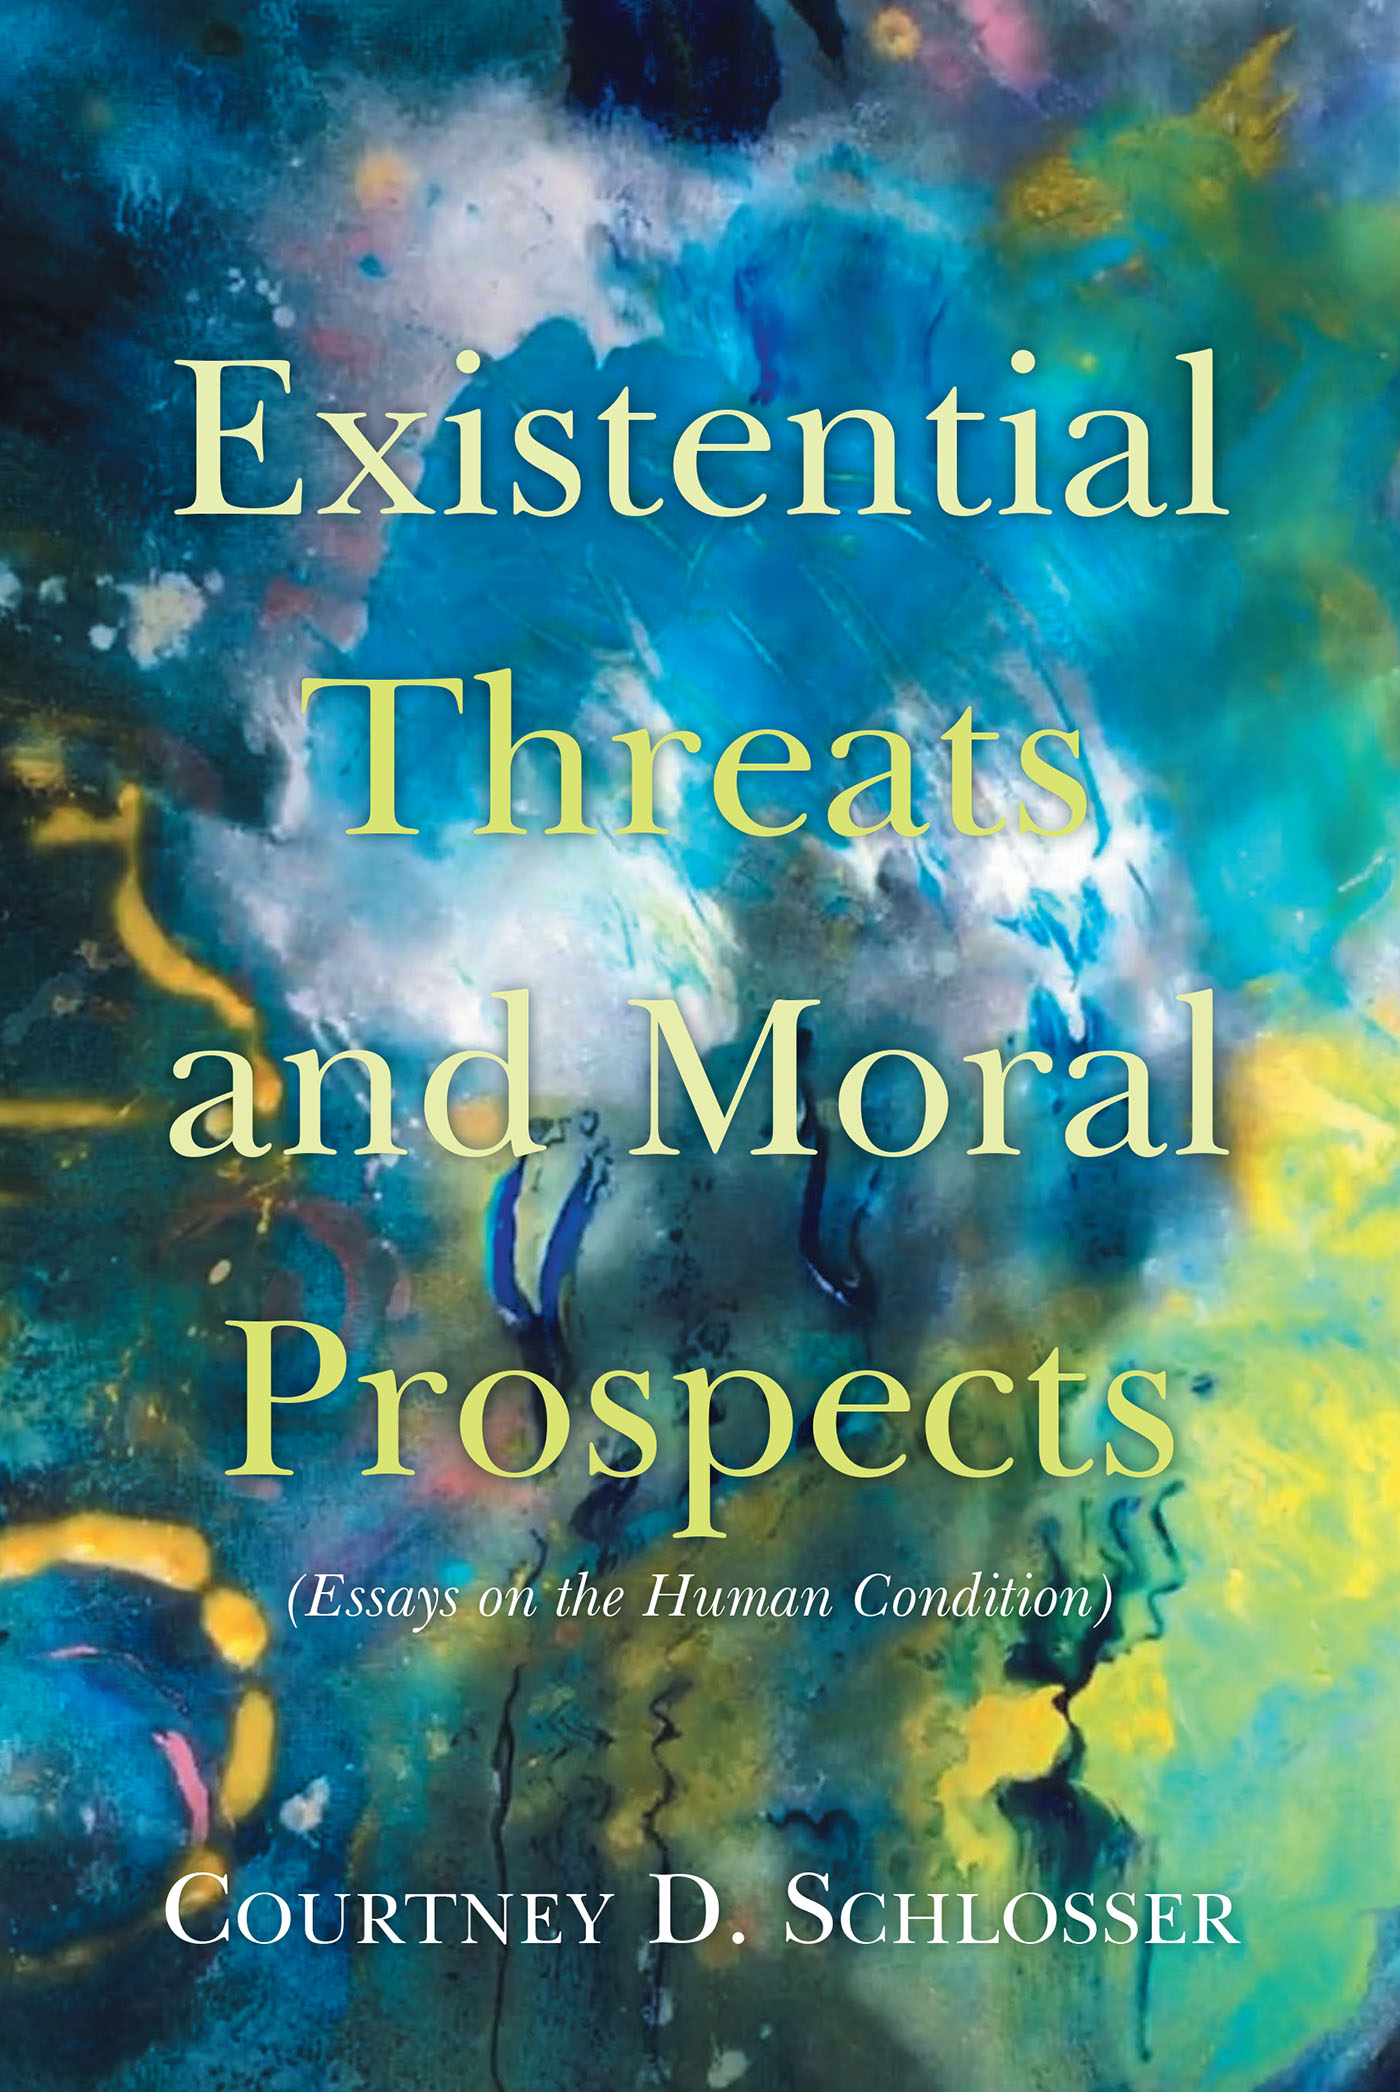 Author Courtney D. Schlosser’s New Book, “Existential Threats and Moral Prospects: (Essays on the Human Condition),” Explores the Current State of the World